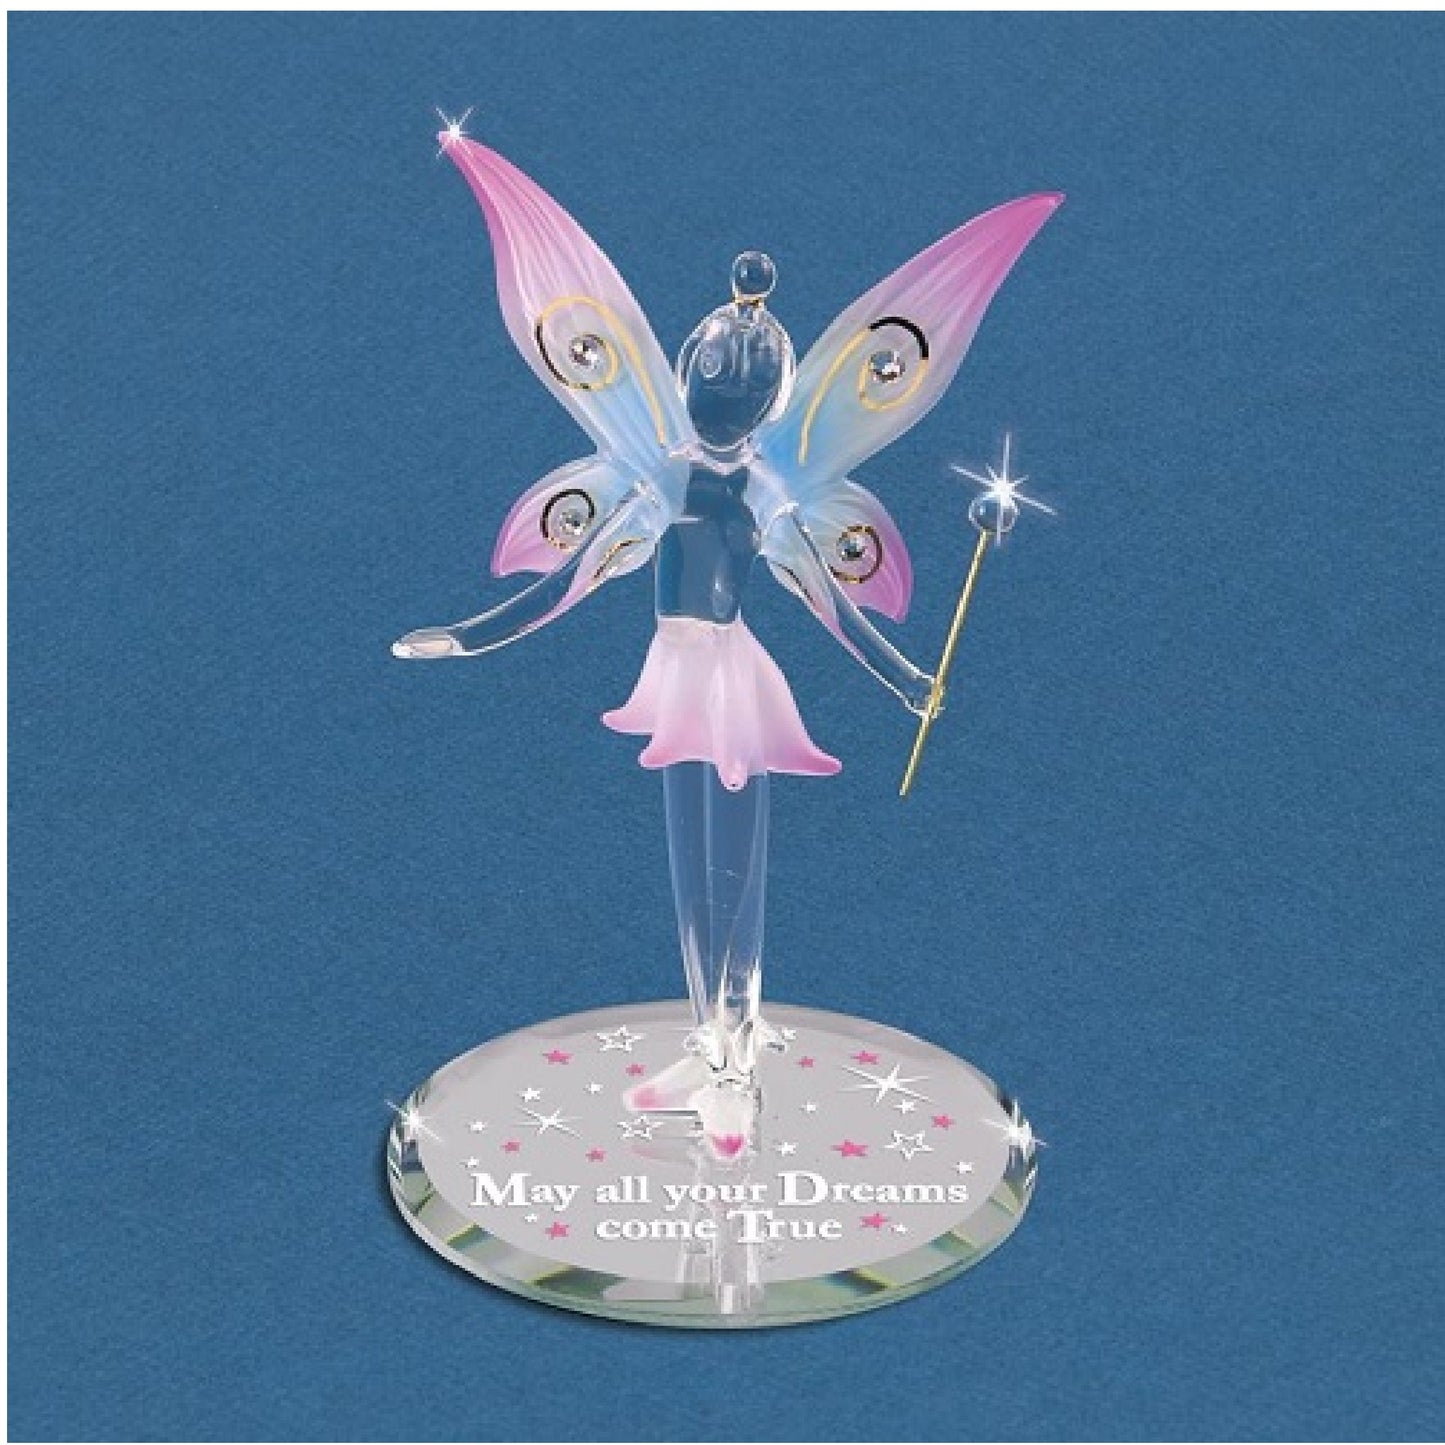 Glass Baron "May All Your Dreams" Fairy Figurine